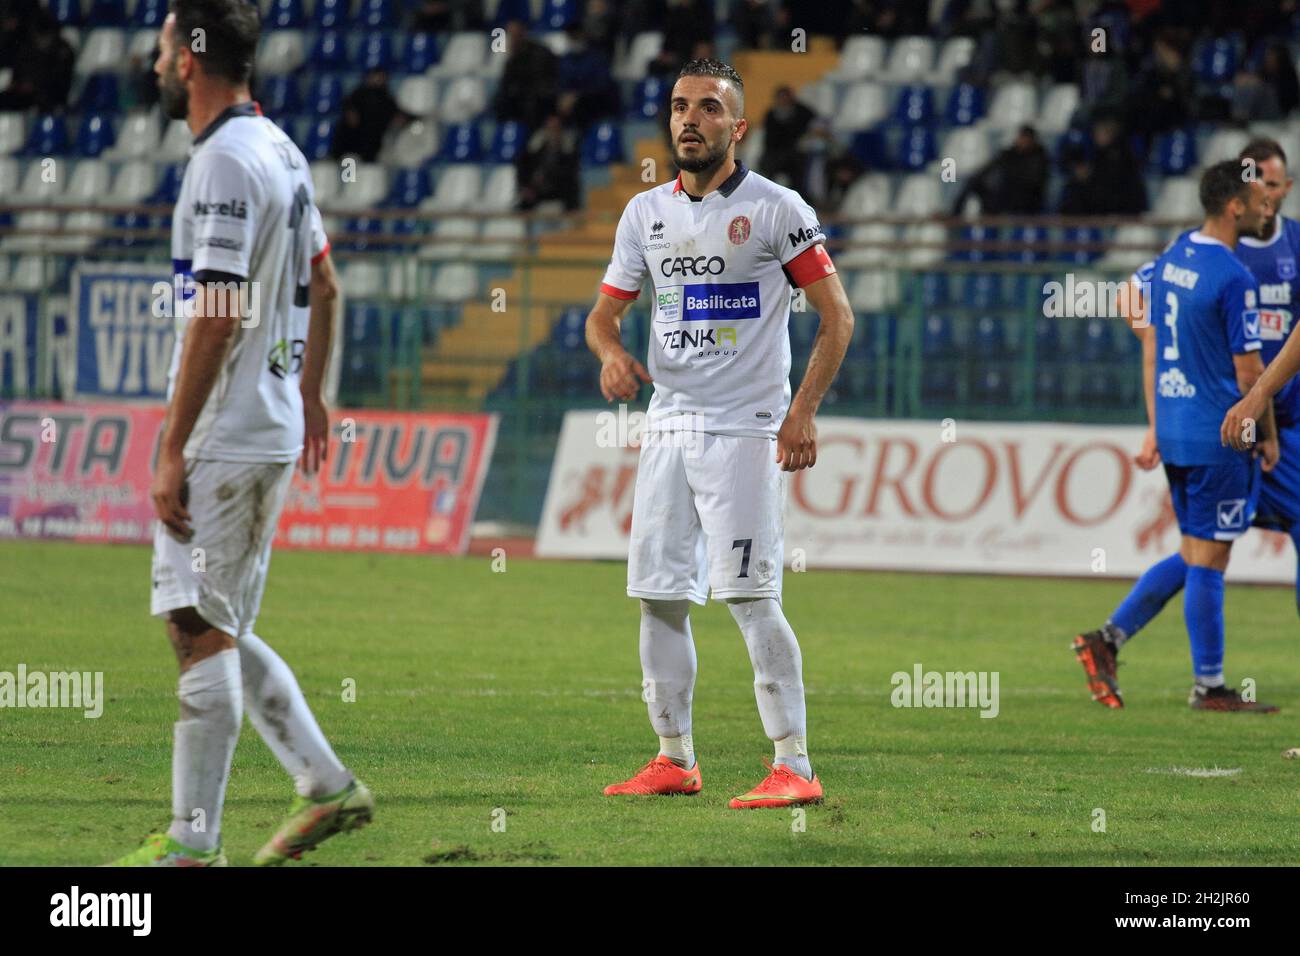 Giuseppe Coccia (7) Potenza captain during the Italian Football Championship Serie C Girone C Lega Pro, tenth day of the first round Paganese vs Potenza. Paganese wins 2 - 0. (Photo by Pasquale Senatore/Pacific Press/Sipa USA) Stock Photo